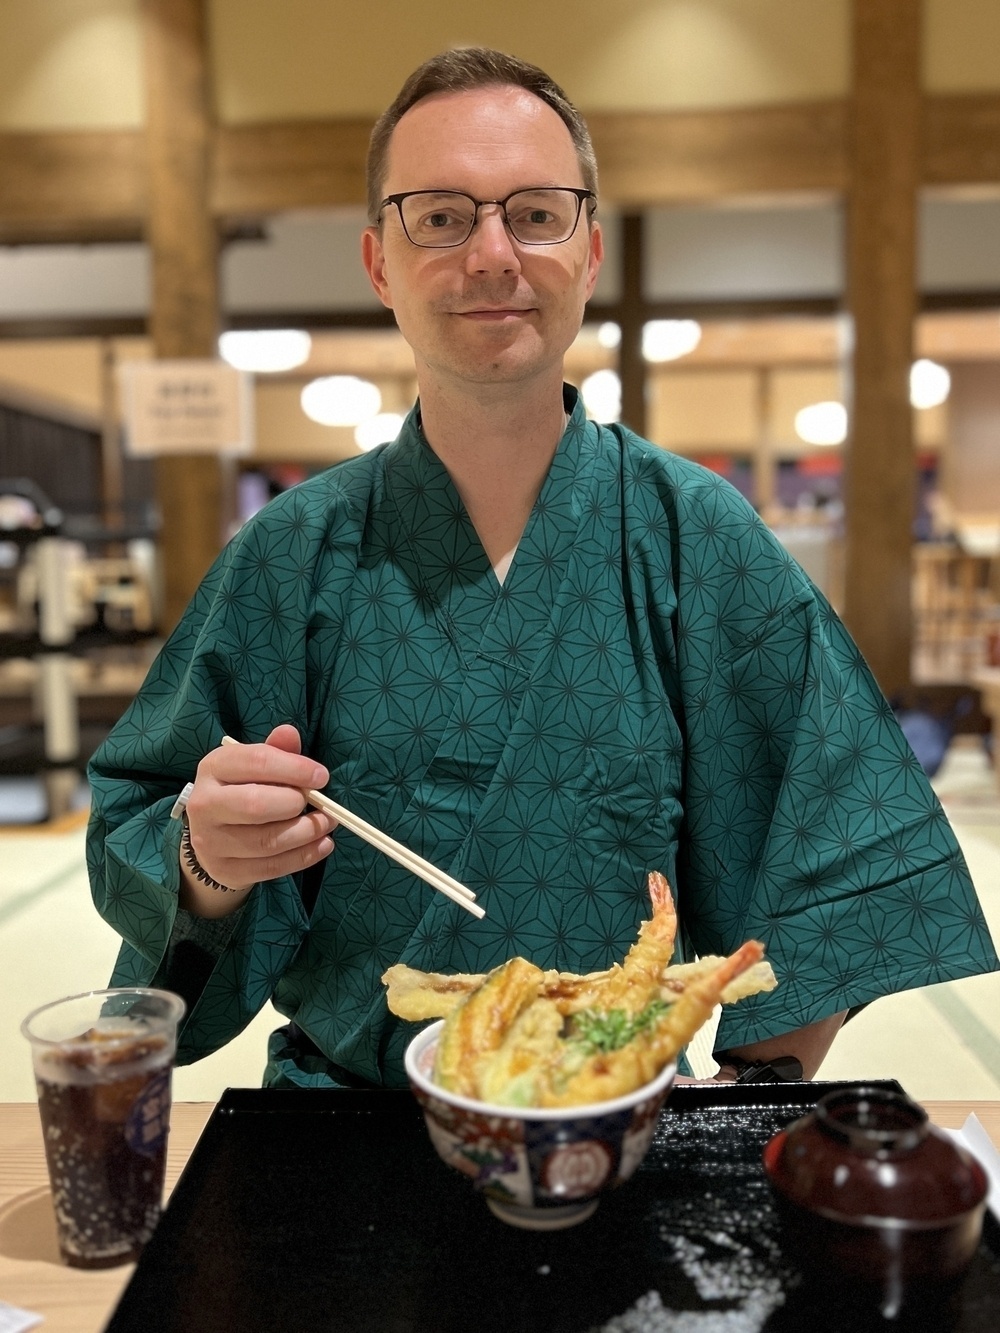 Chad in a yukata about to chow down on a giant tempura bowl